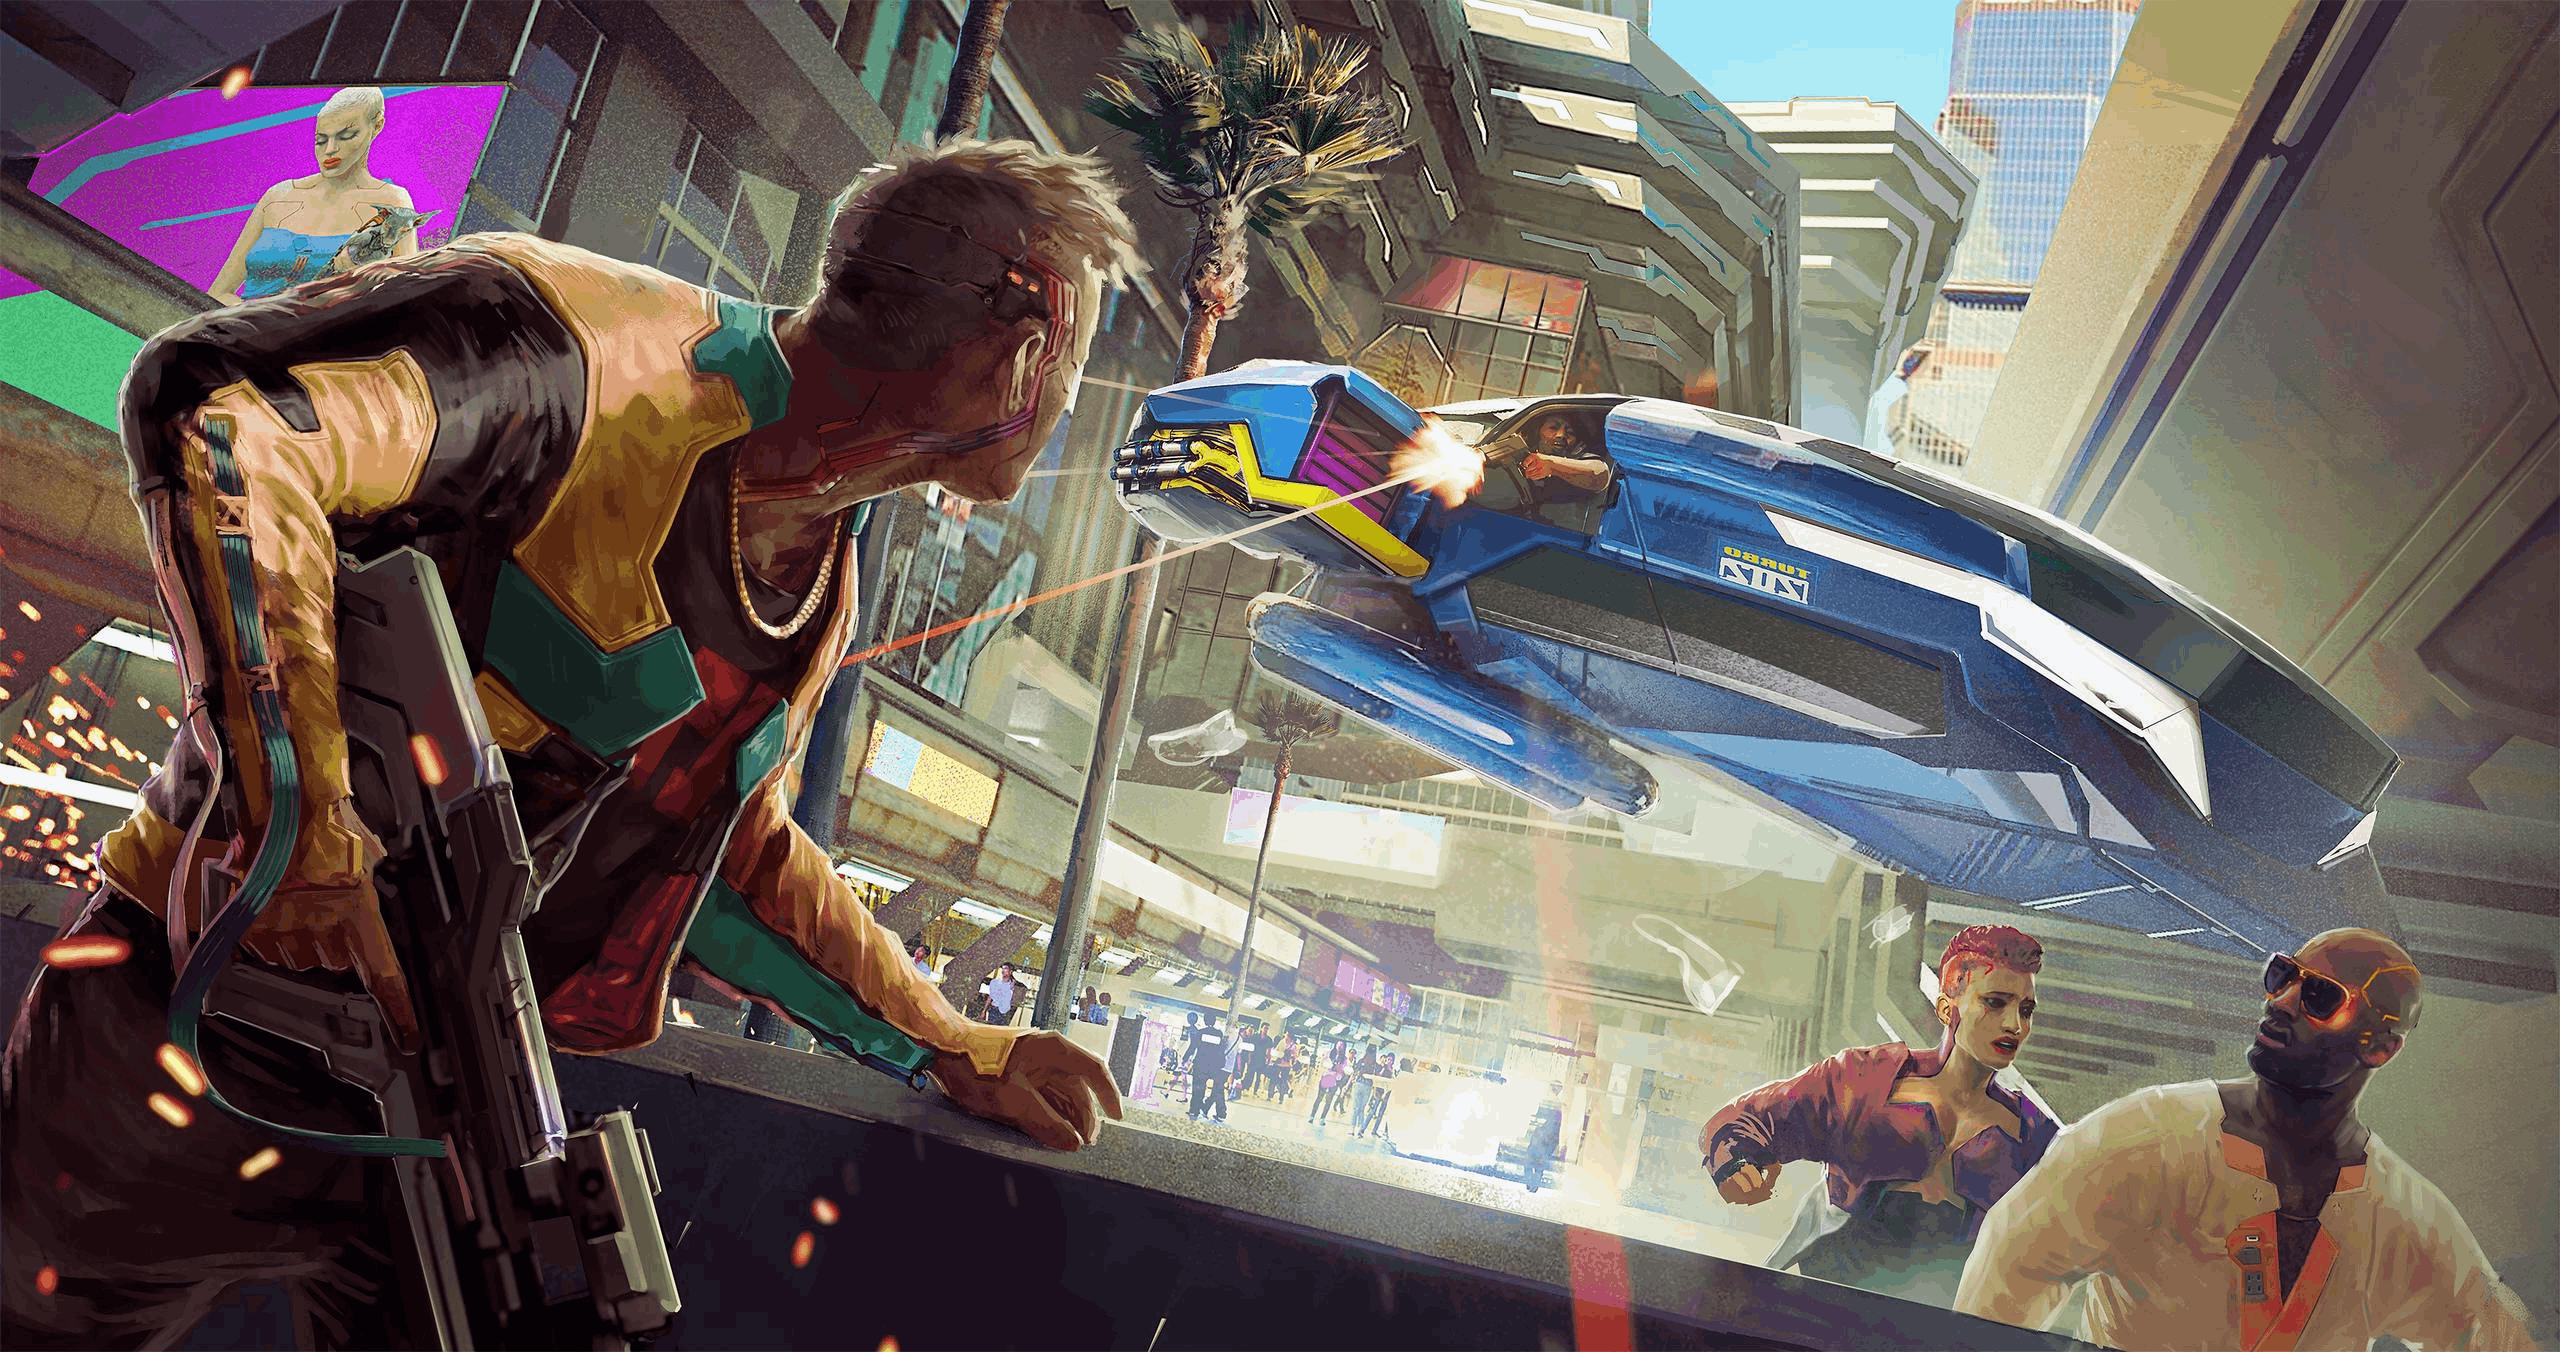 Cyberpunk 2077 free trial on PS5 and Xbox Series X|S: demo details